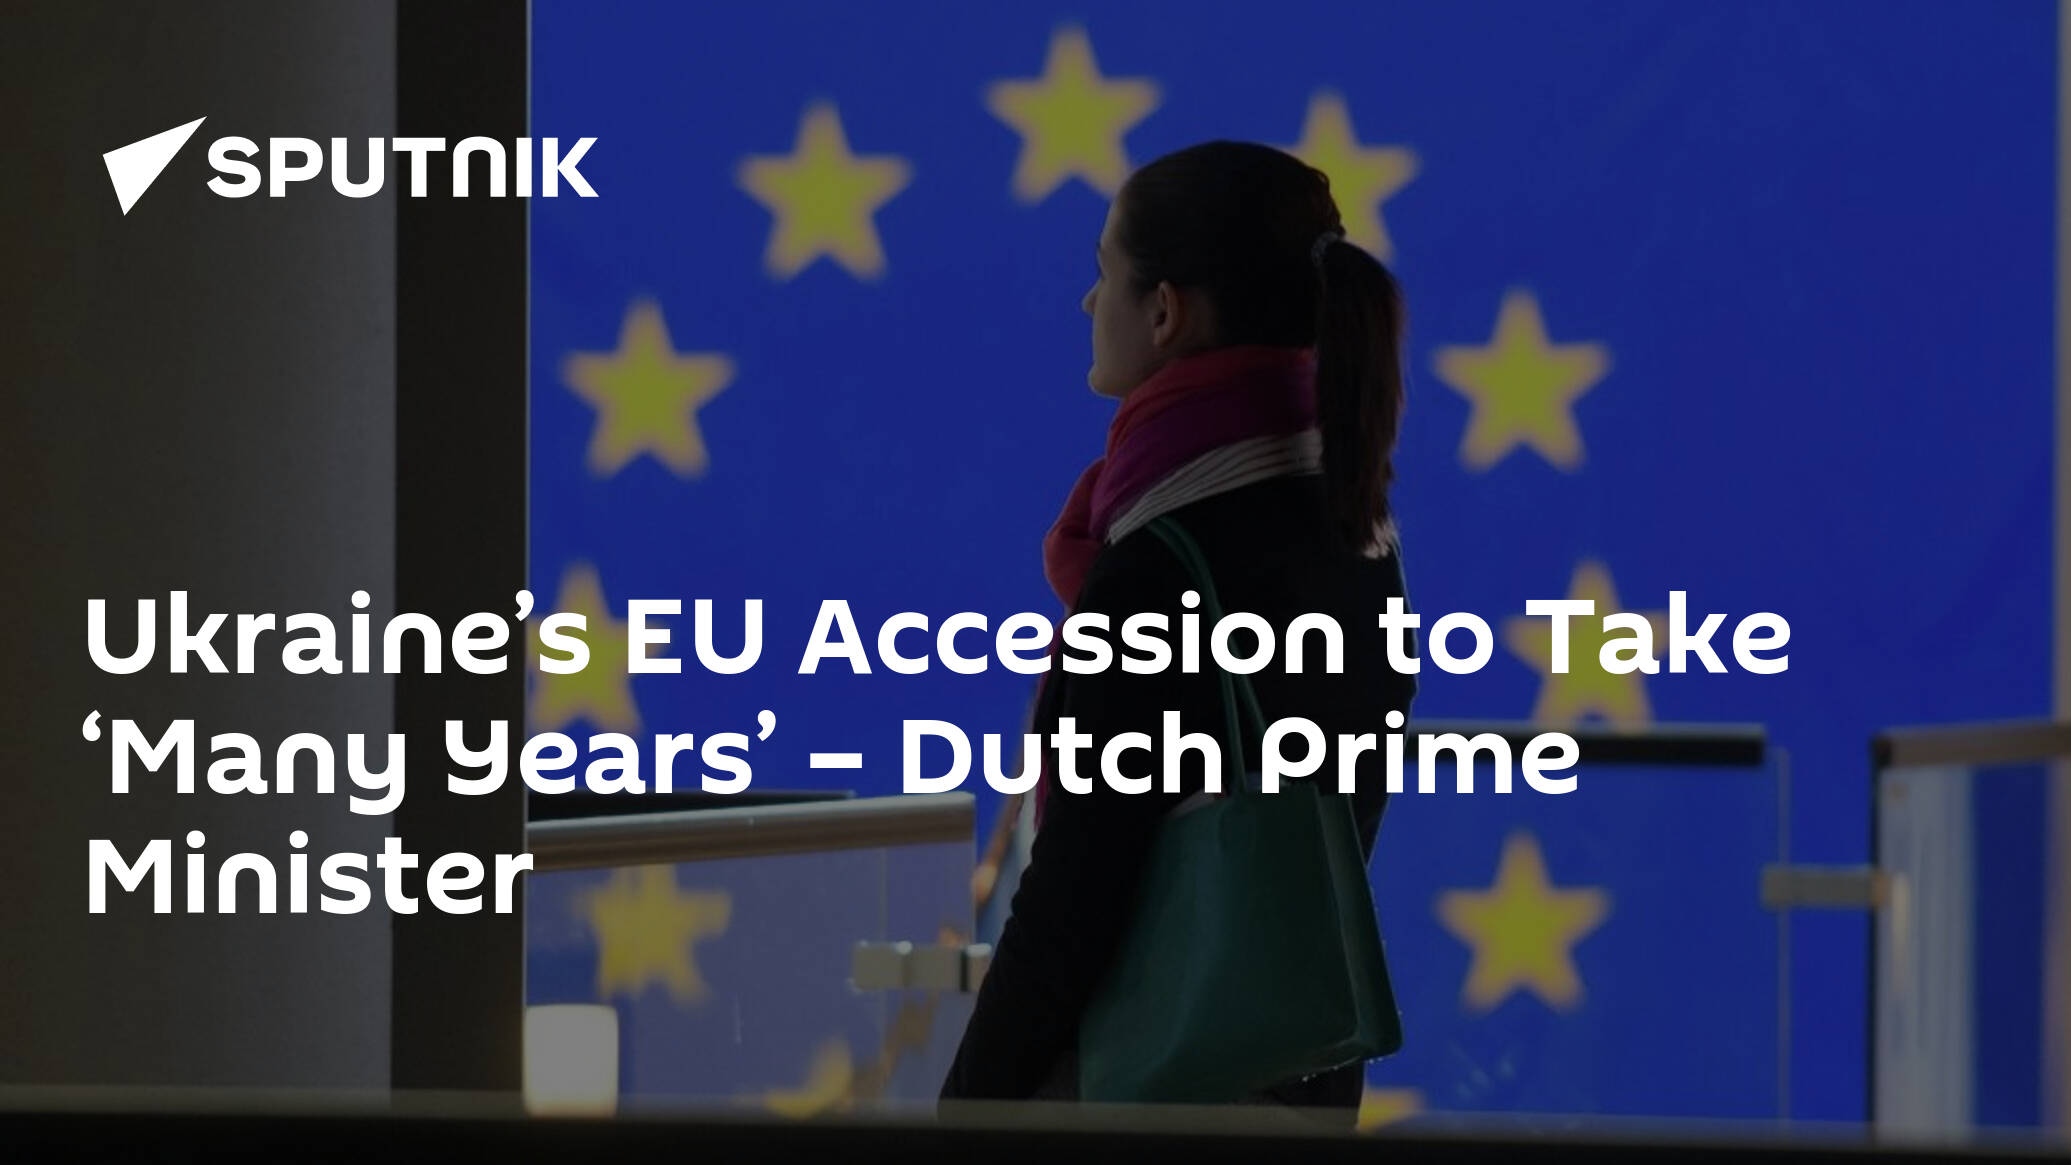 Ukraine’s EU Accession to Take ‘Many Years’ Dutch Prime Minister